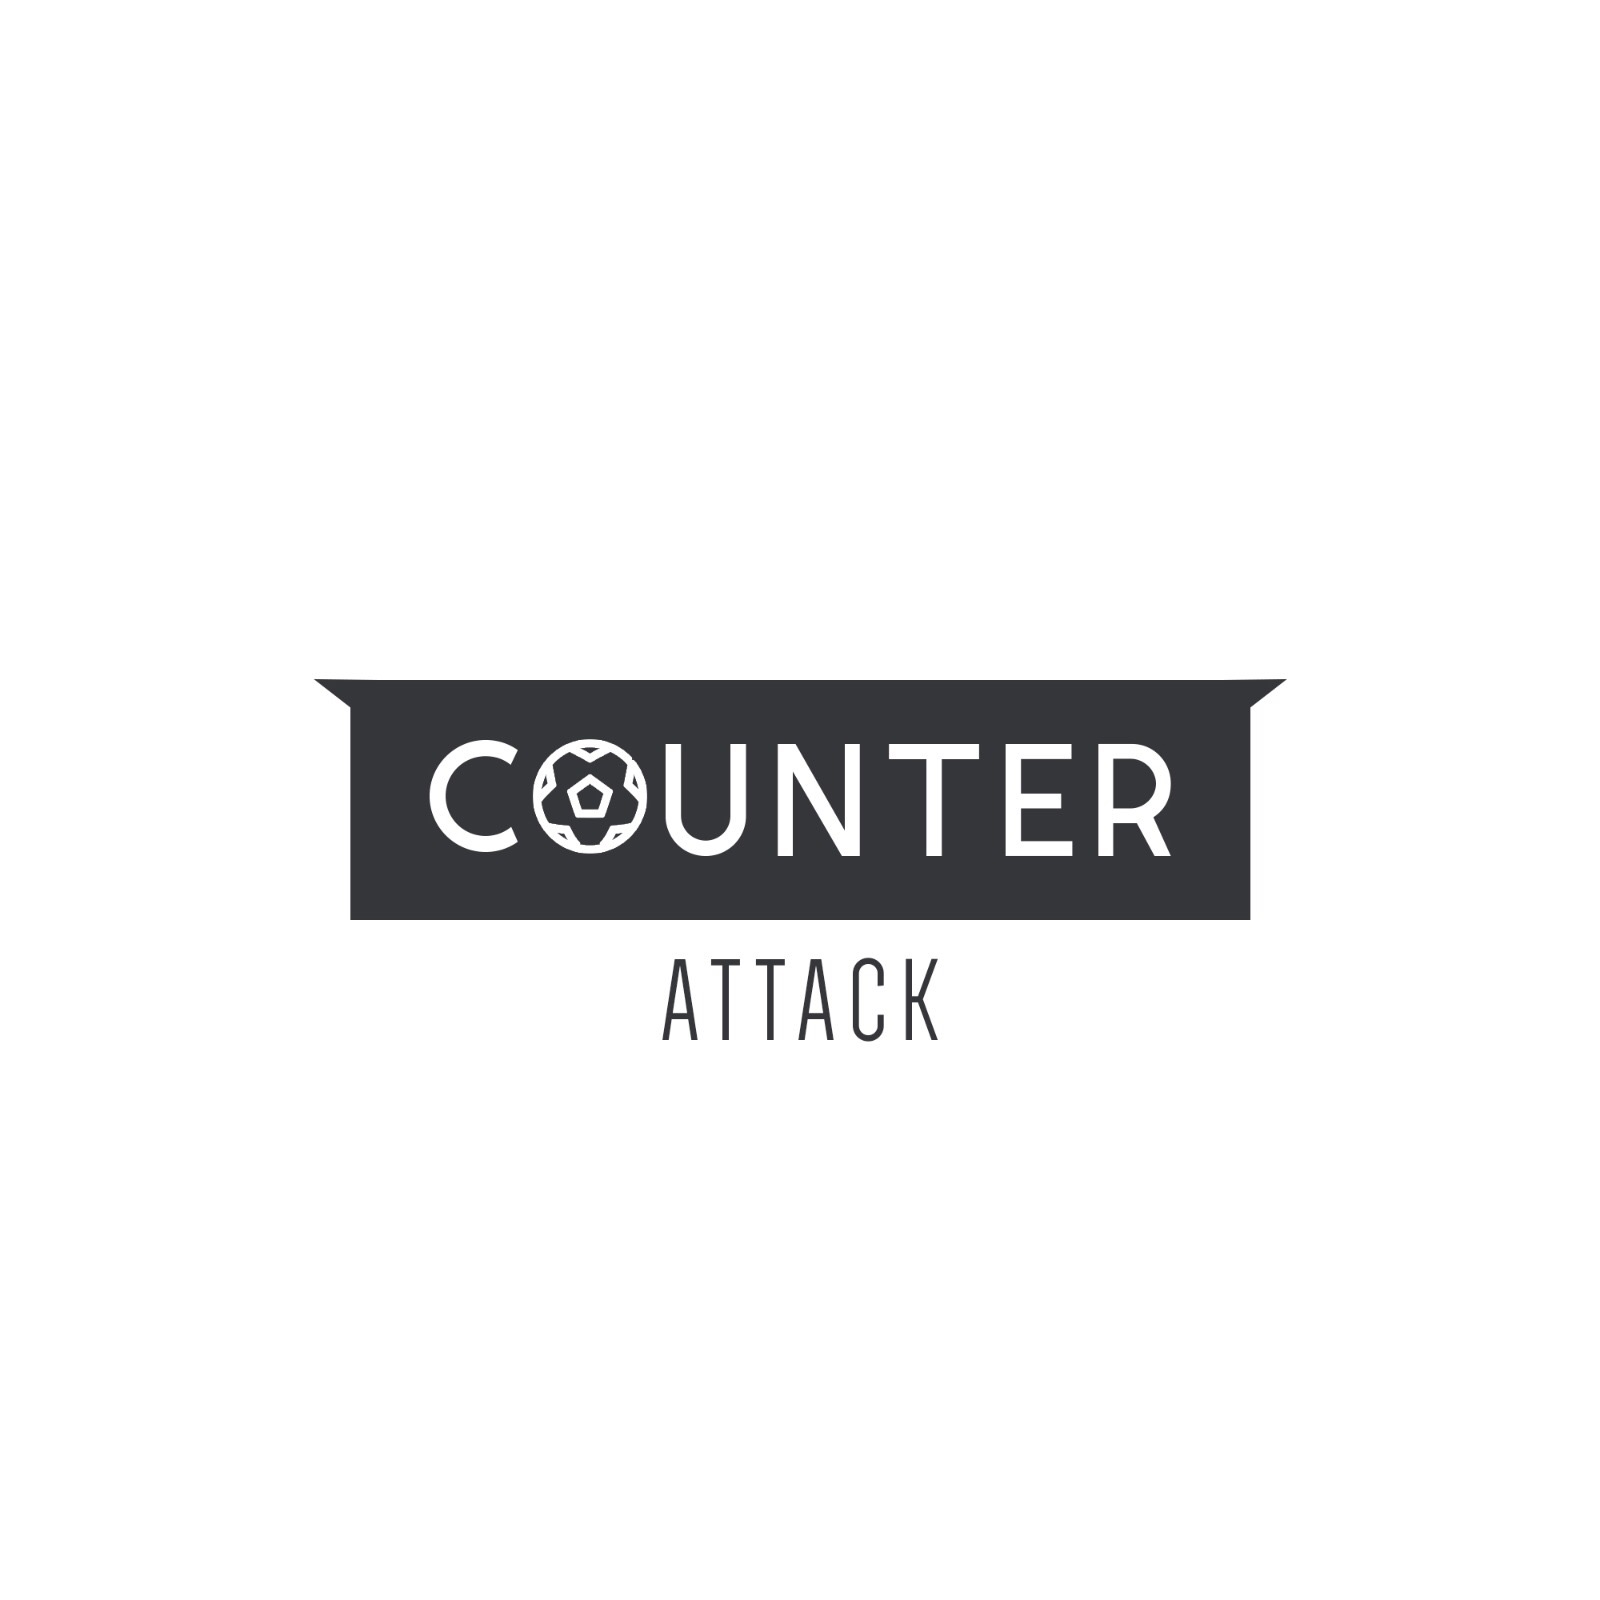 Counter Attack - Episode 27 - Why don't a lot of inner city black boys make it?